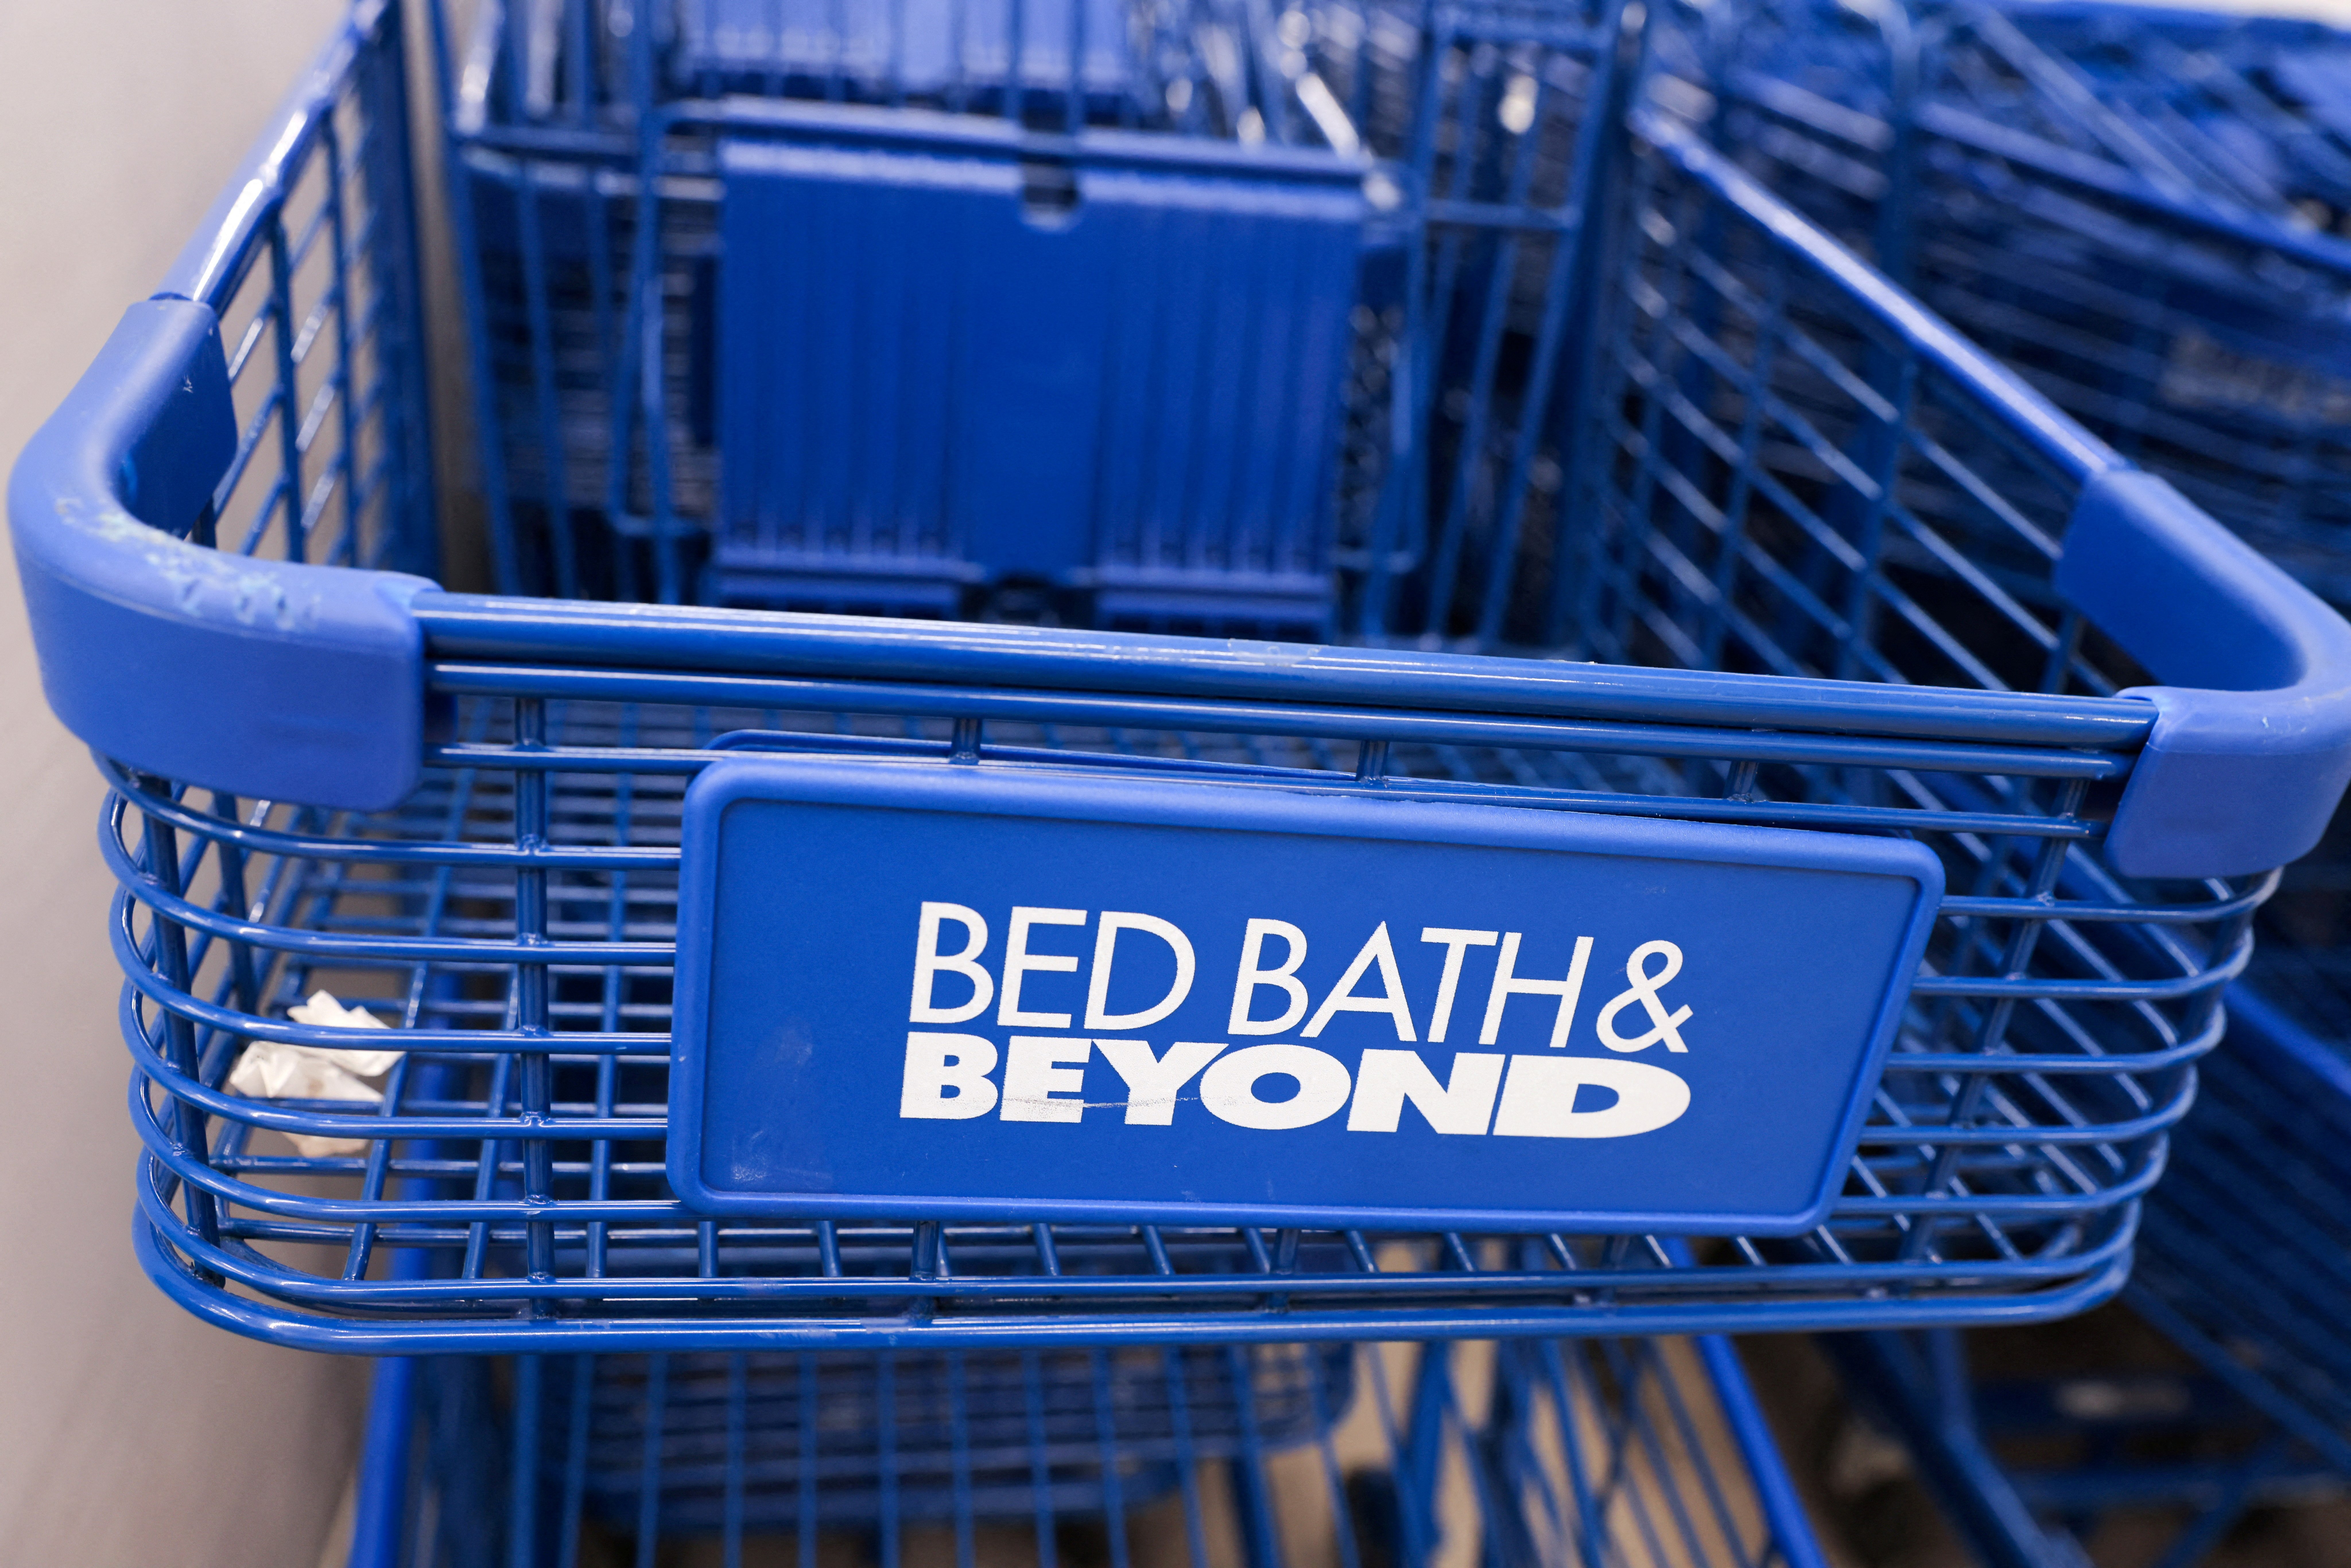 FILE PHOTO: A shopping cart is seen at a Bed Bath & Beyond store in Manhattan, New York City, U.S., June 29, 2022. REUTERS/Andrew Kelly/File Photo